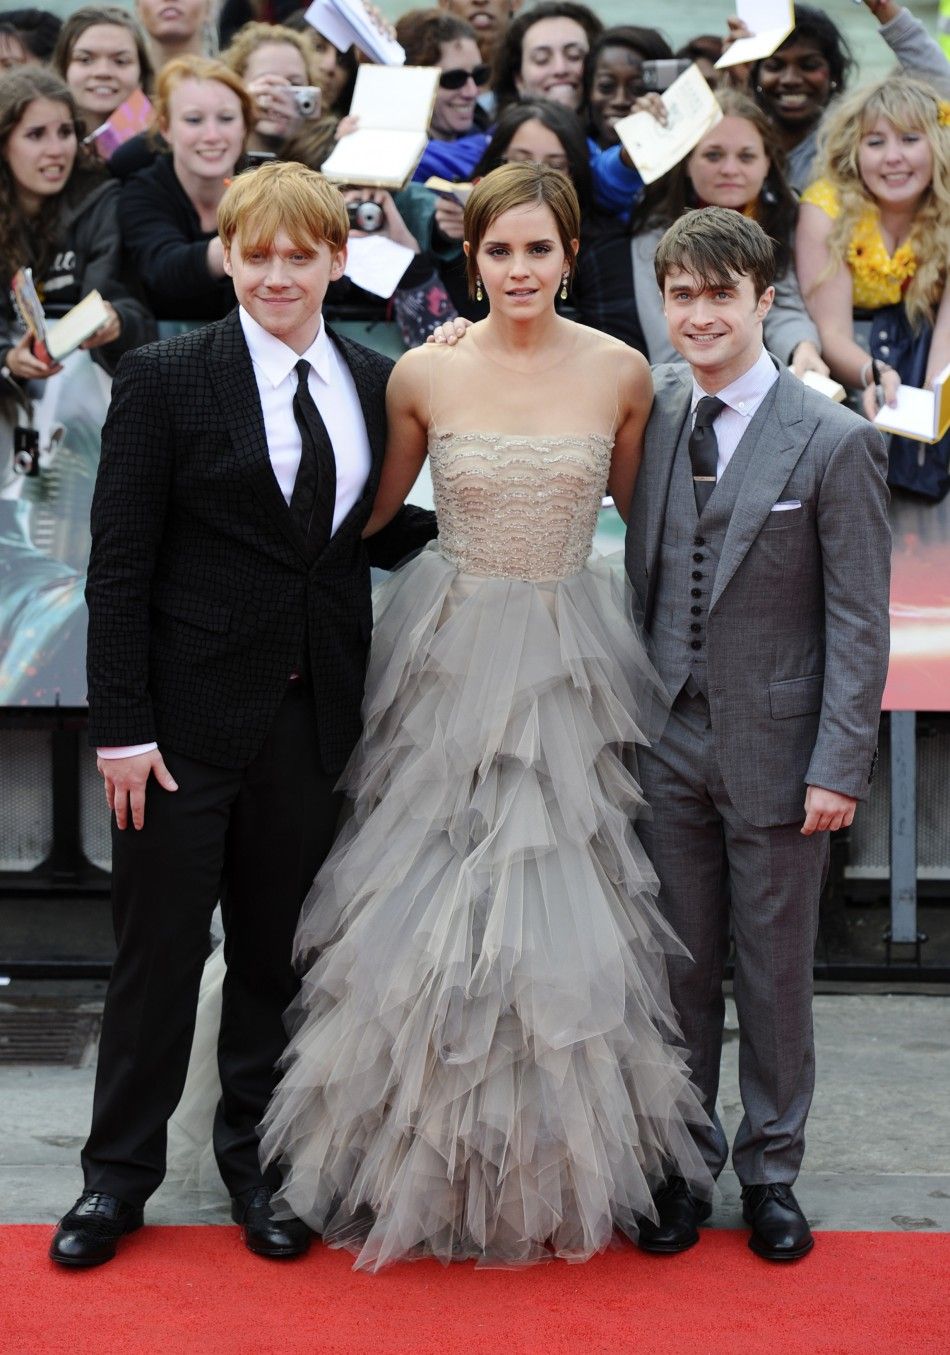 Watson poses with actors Grint and Radcliffe at the world premiere of quotHarry Potter and the Deathly Hallows - Part 2quot in Trafalgar Square, in central London